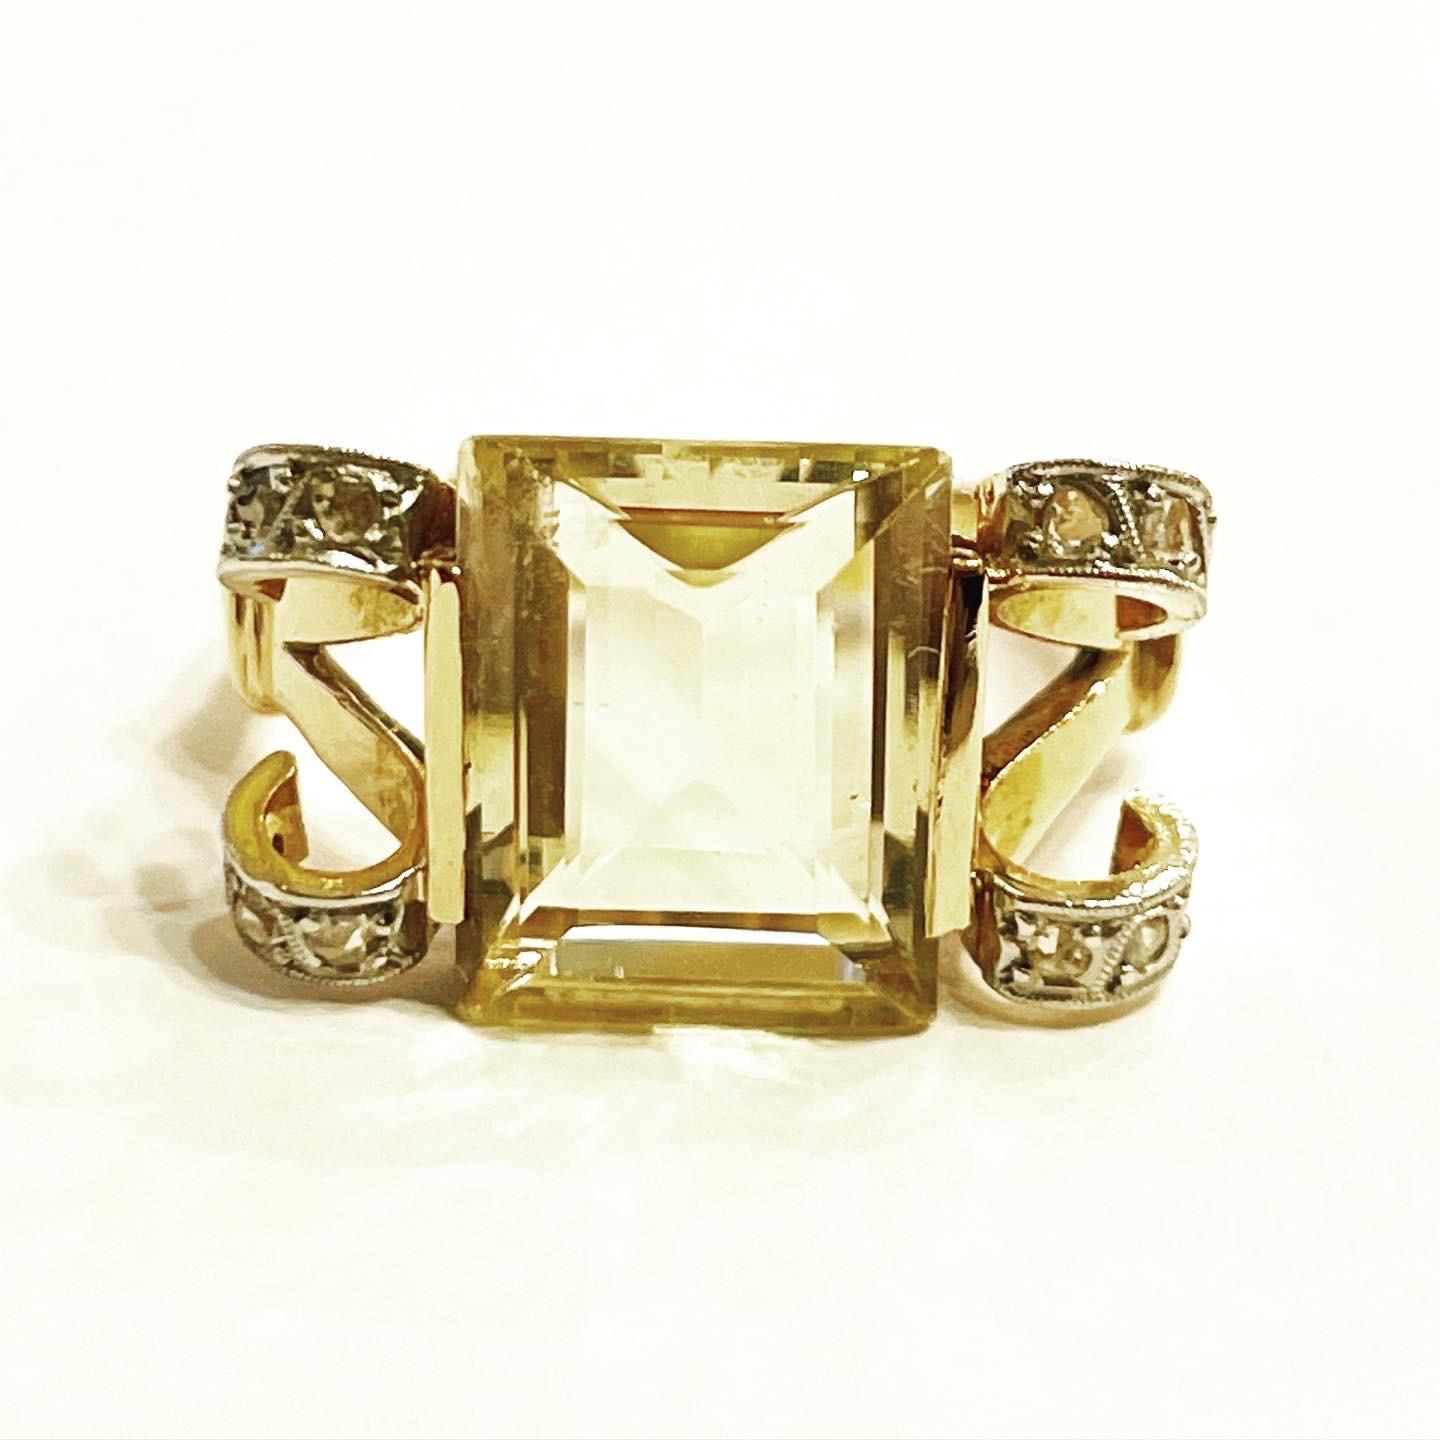 Beautifully designed and handcrafted in 18 karat yellow gold and platinum, this Retro cocktail ring from circa 1940 features a lovely Citrine measured to weigh approximately 3.60 carats and old European cut diamonds.
Superb tank ring, linear and